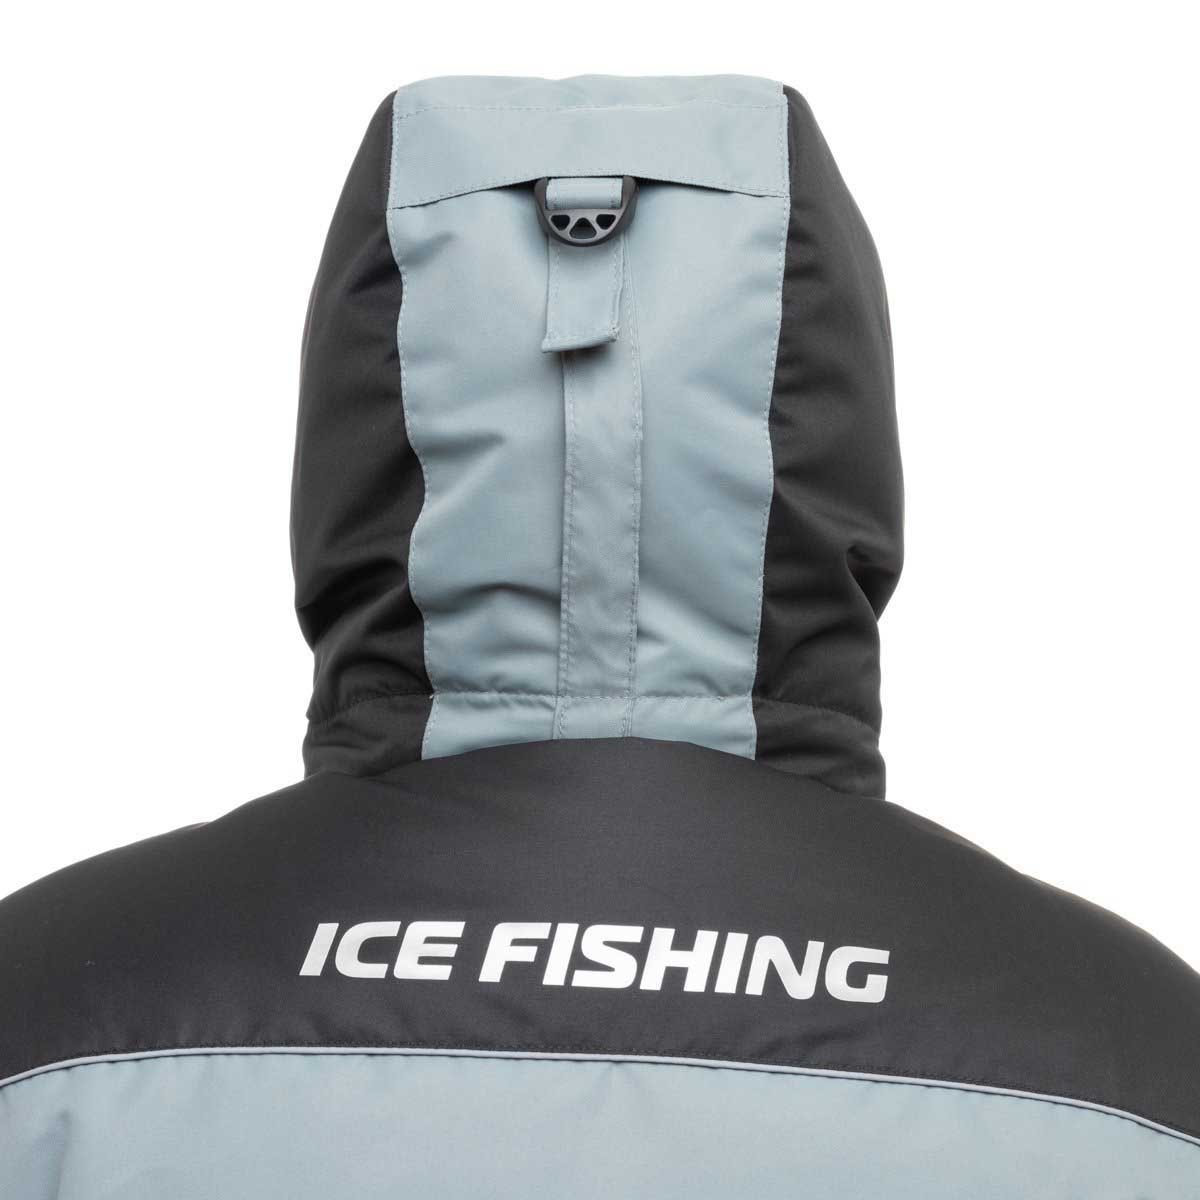 Angler Pro Windproof Winter Jacket and Bibs Set for Men for ice fishing